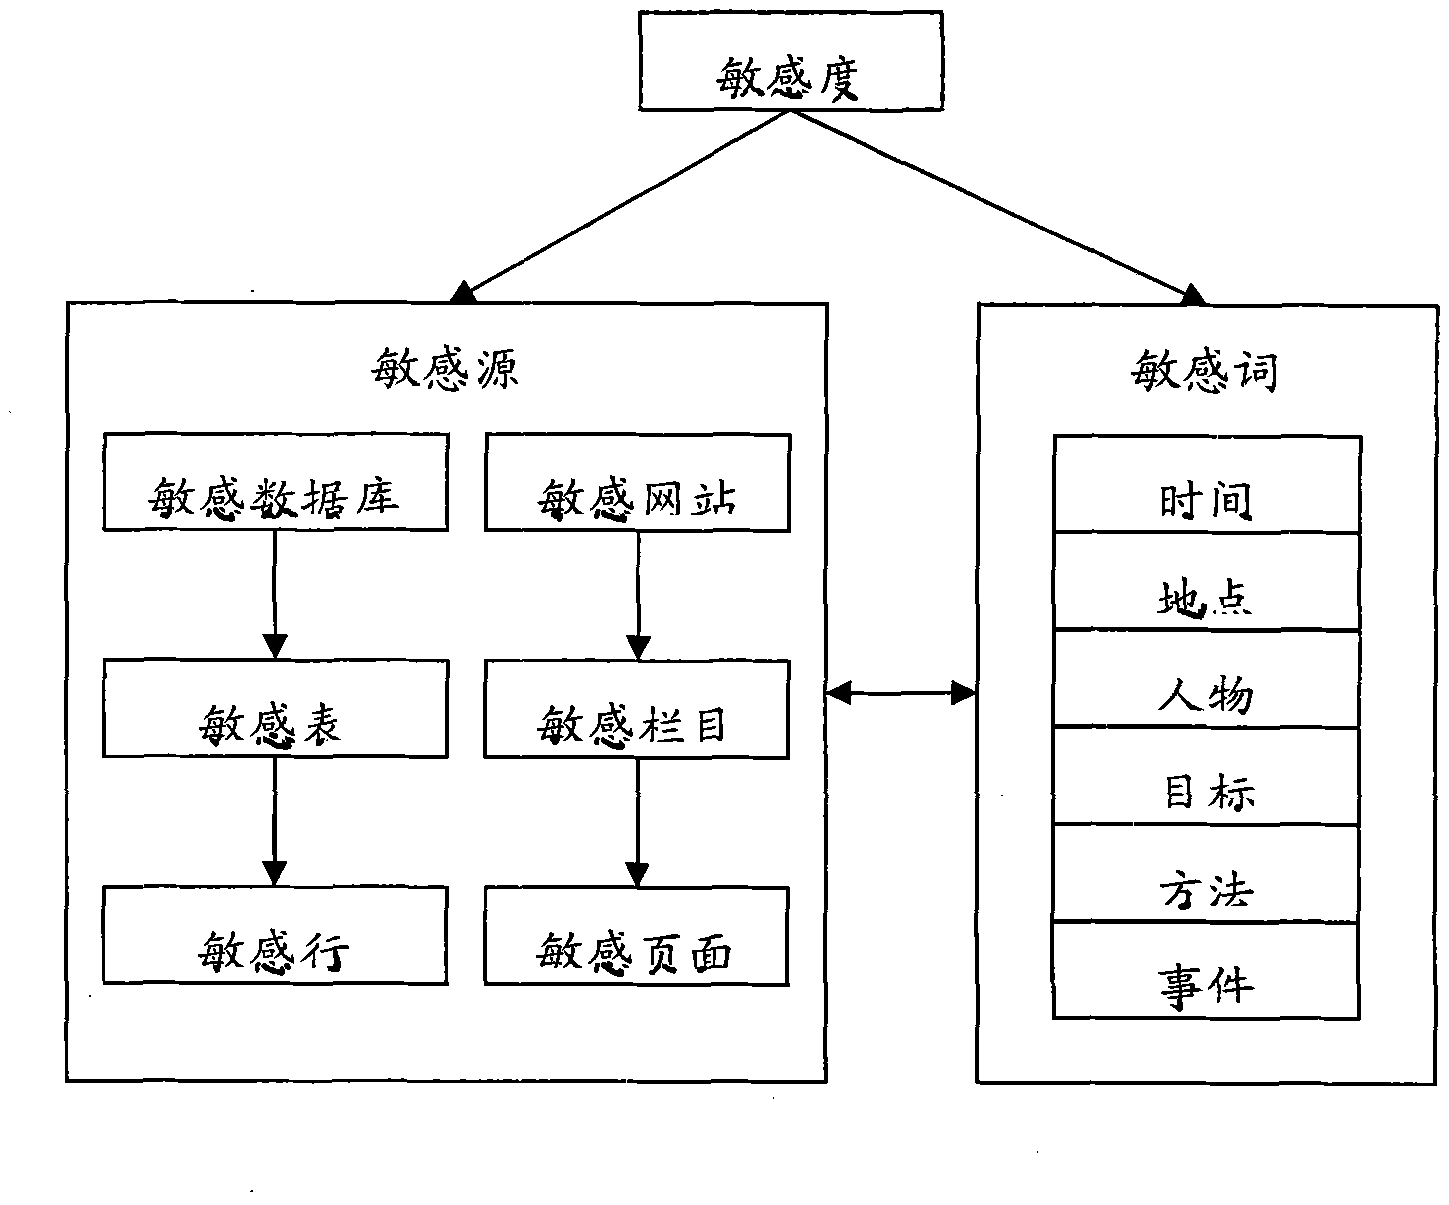 Sensitive information analysis system and method